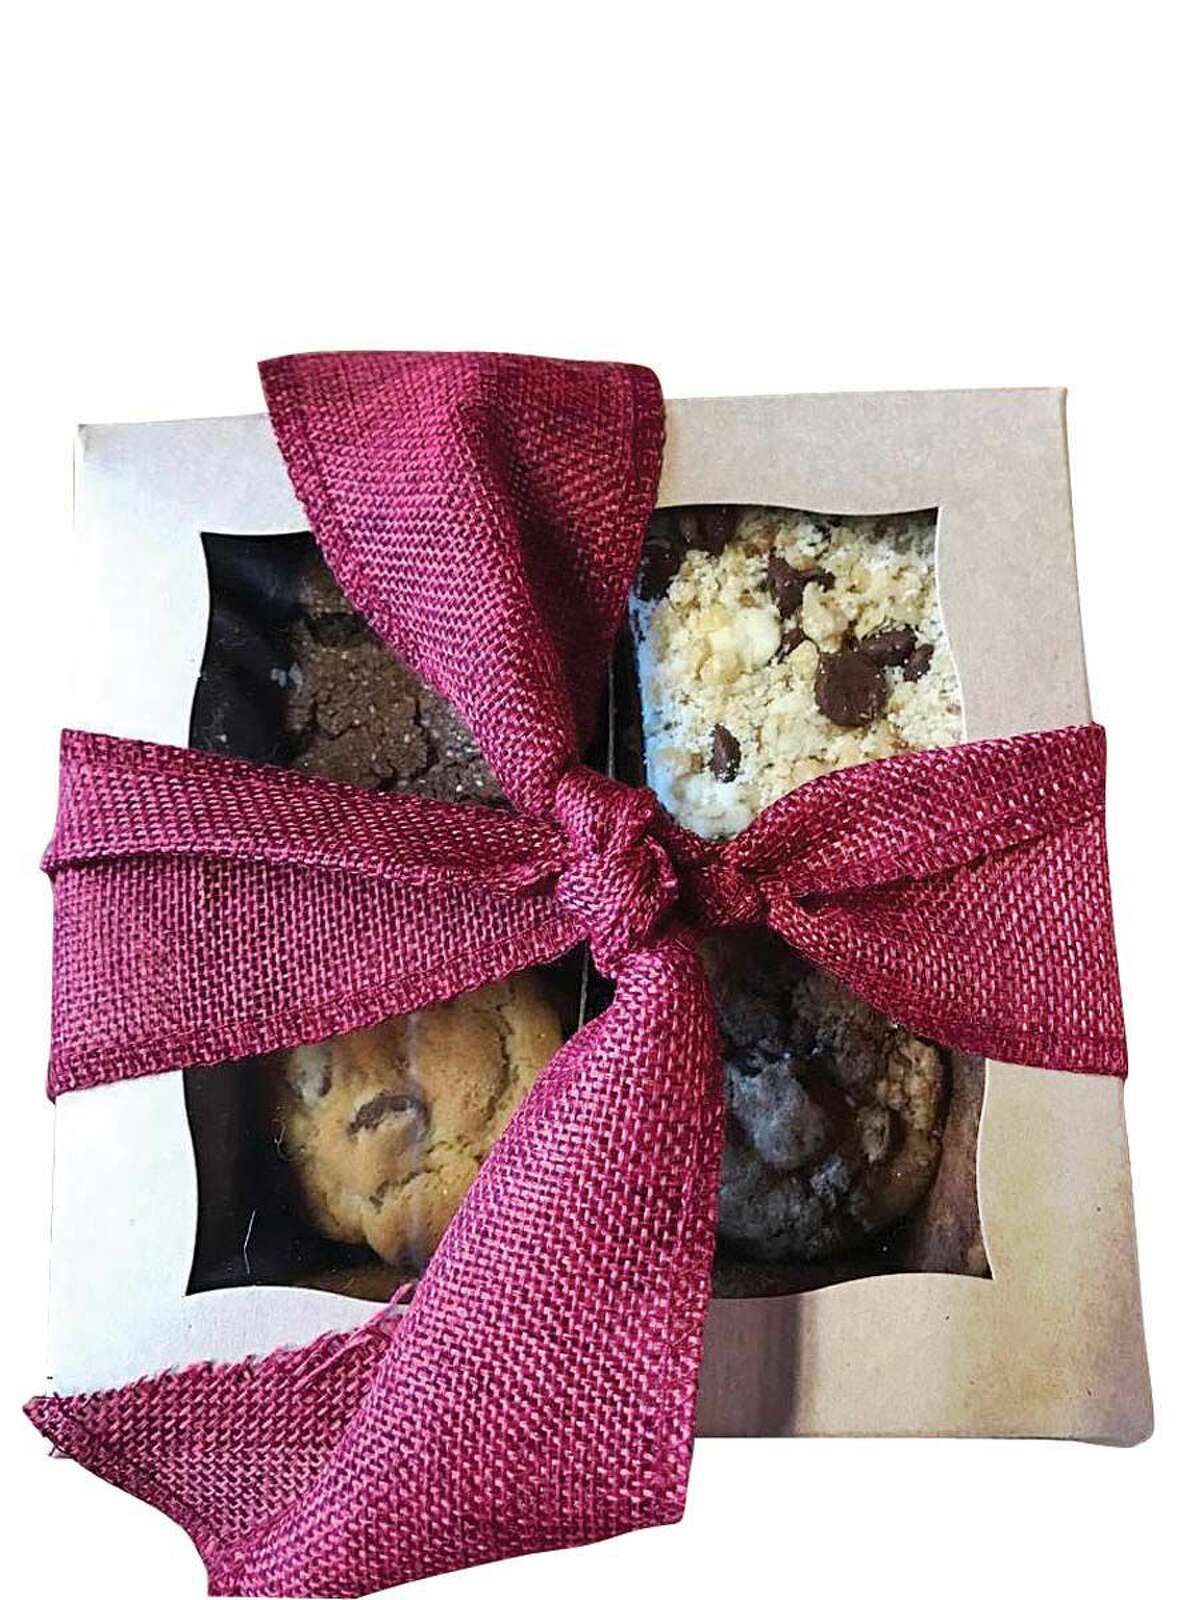 Chocolate Lover’s Cookie Gift Box One pound of handcrafted artisan cookies to satisfy and delight the chocolate lovers in your life. Chocolate chip, chocolate orange, chocolate walnut crumb bars and triple chocolate espresso (approximately 15 cookies and three bars). Use promo code “CTMag” for free shipping through Dec. 31, 2017. $28, Andie’s Cookies, Clinton, andiescookies.com